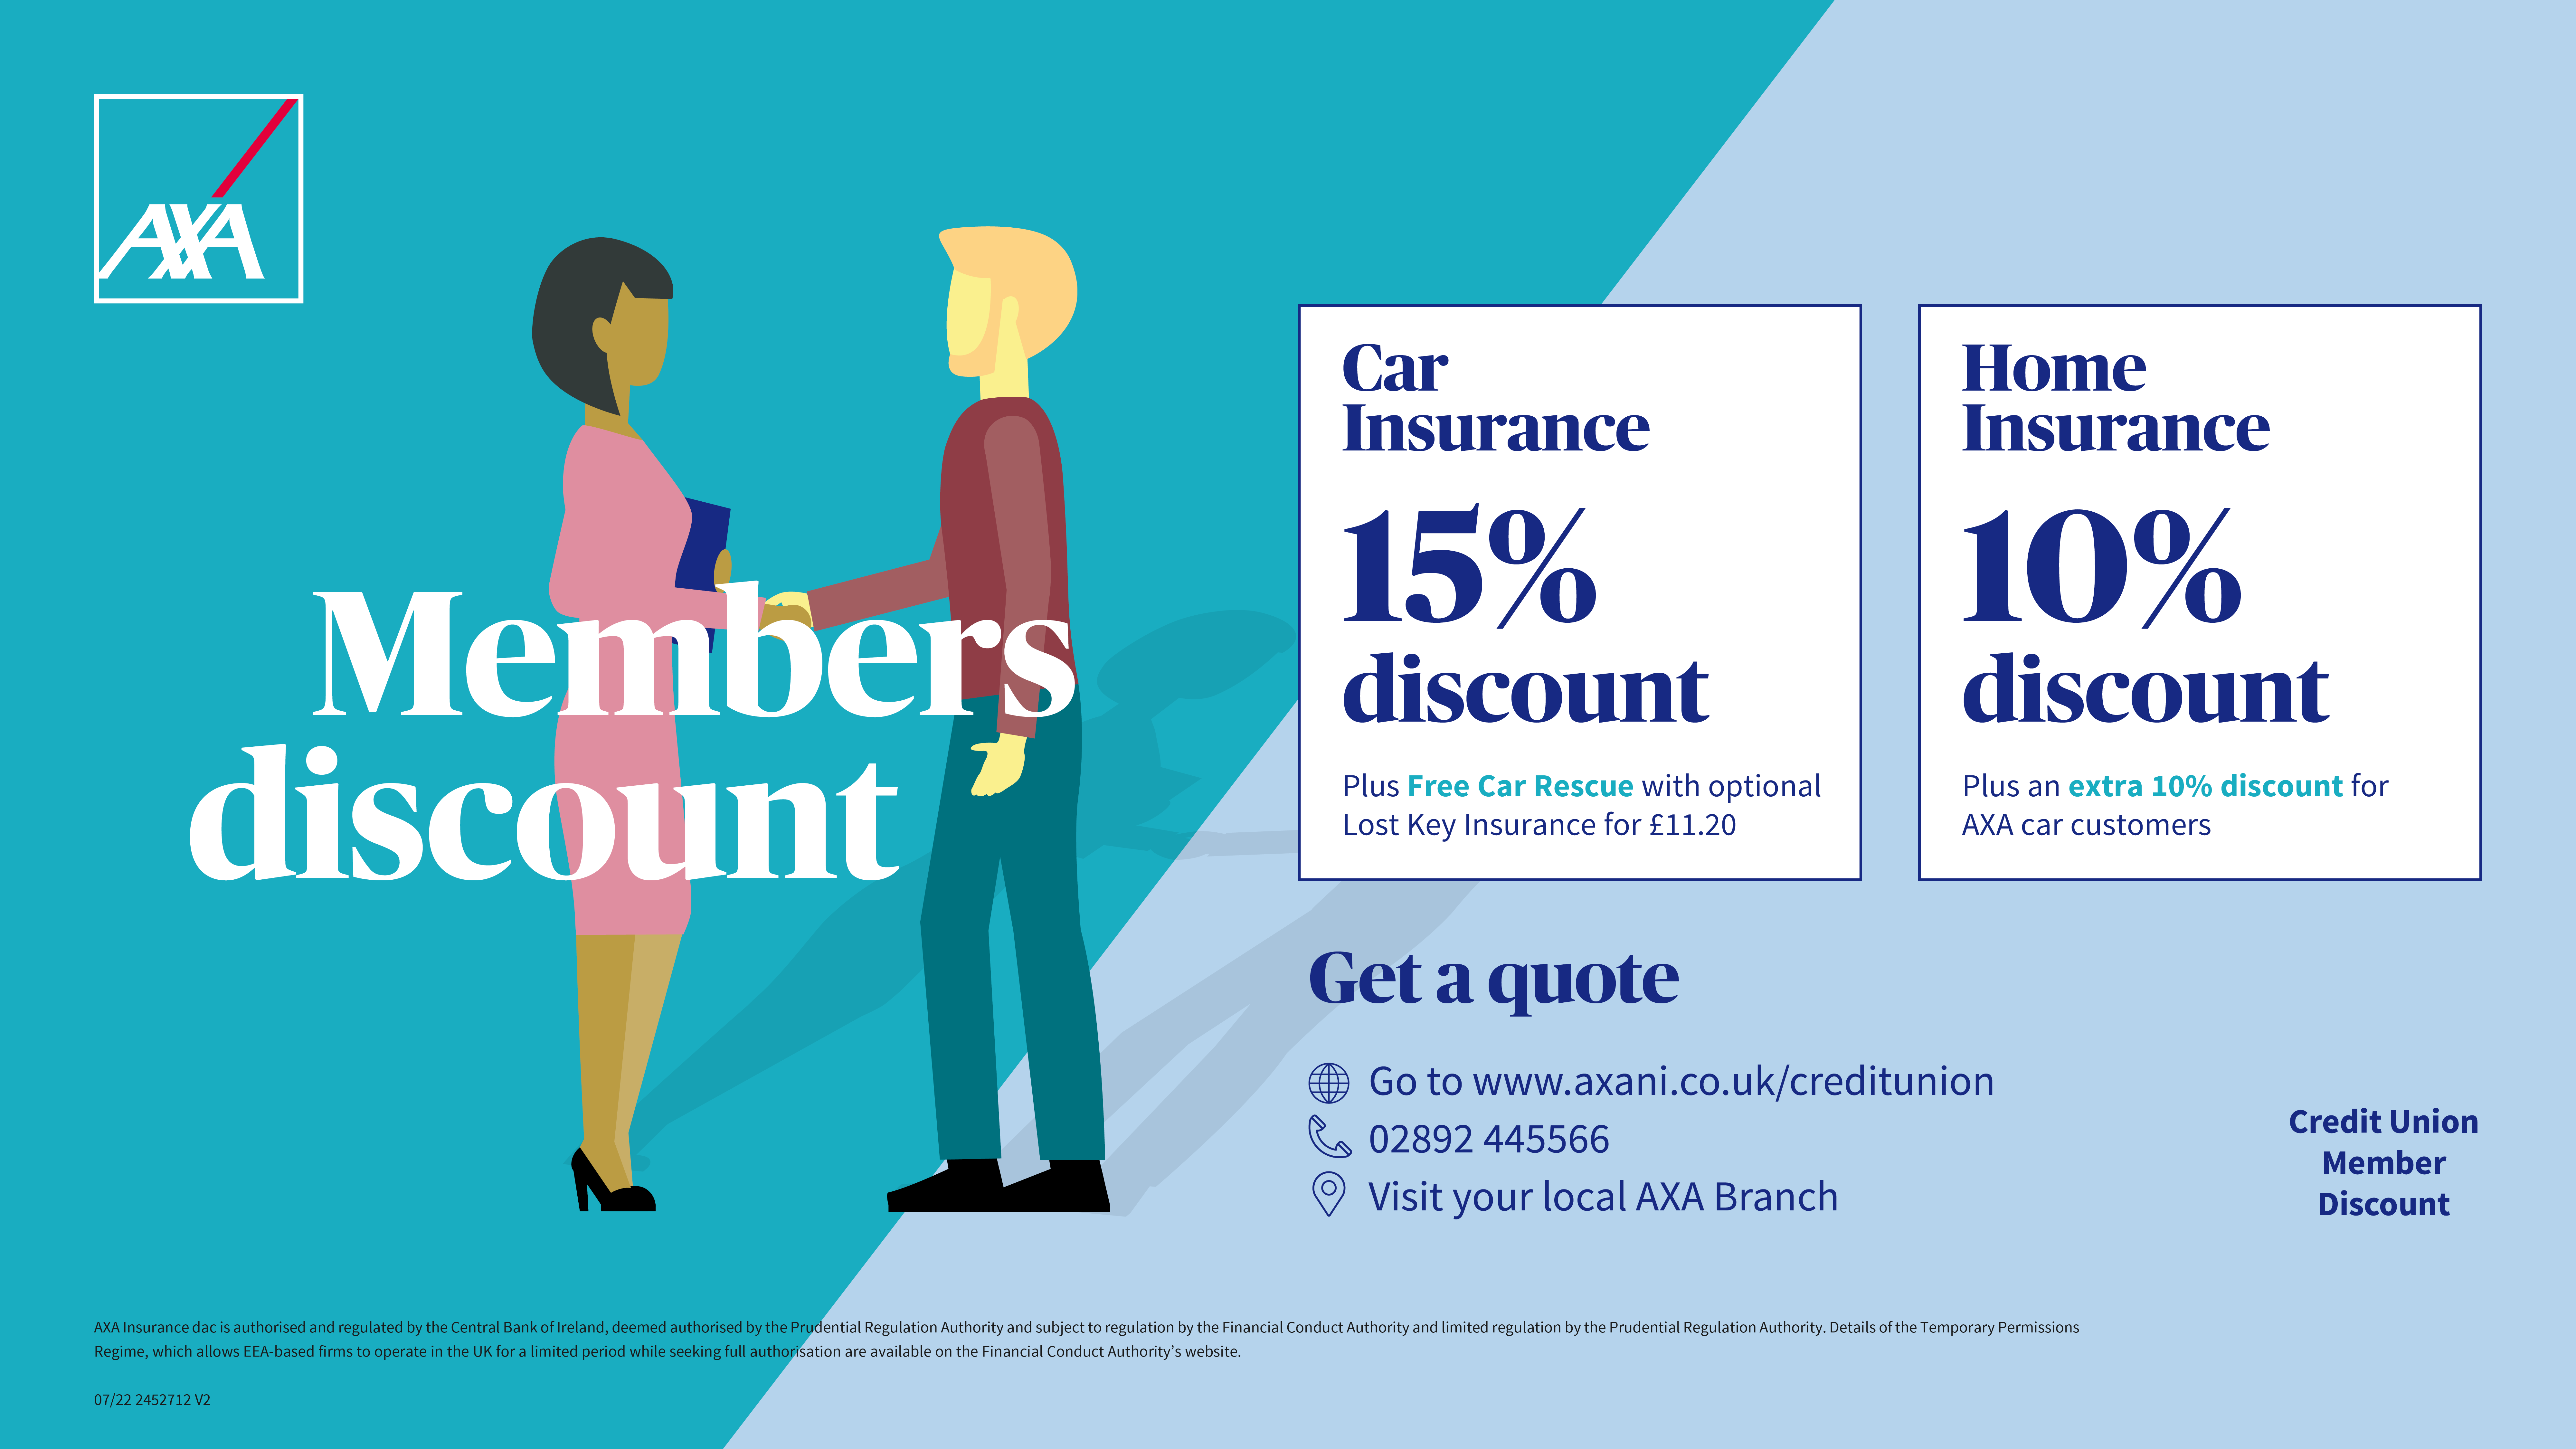 Save on your insurance with AXA!